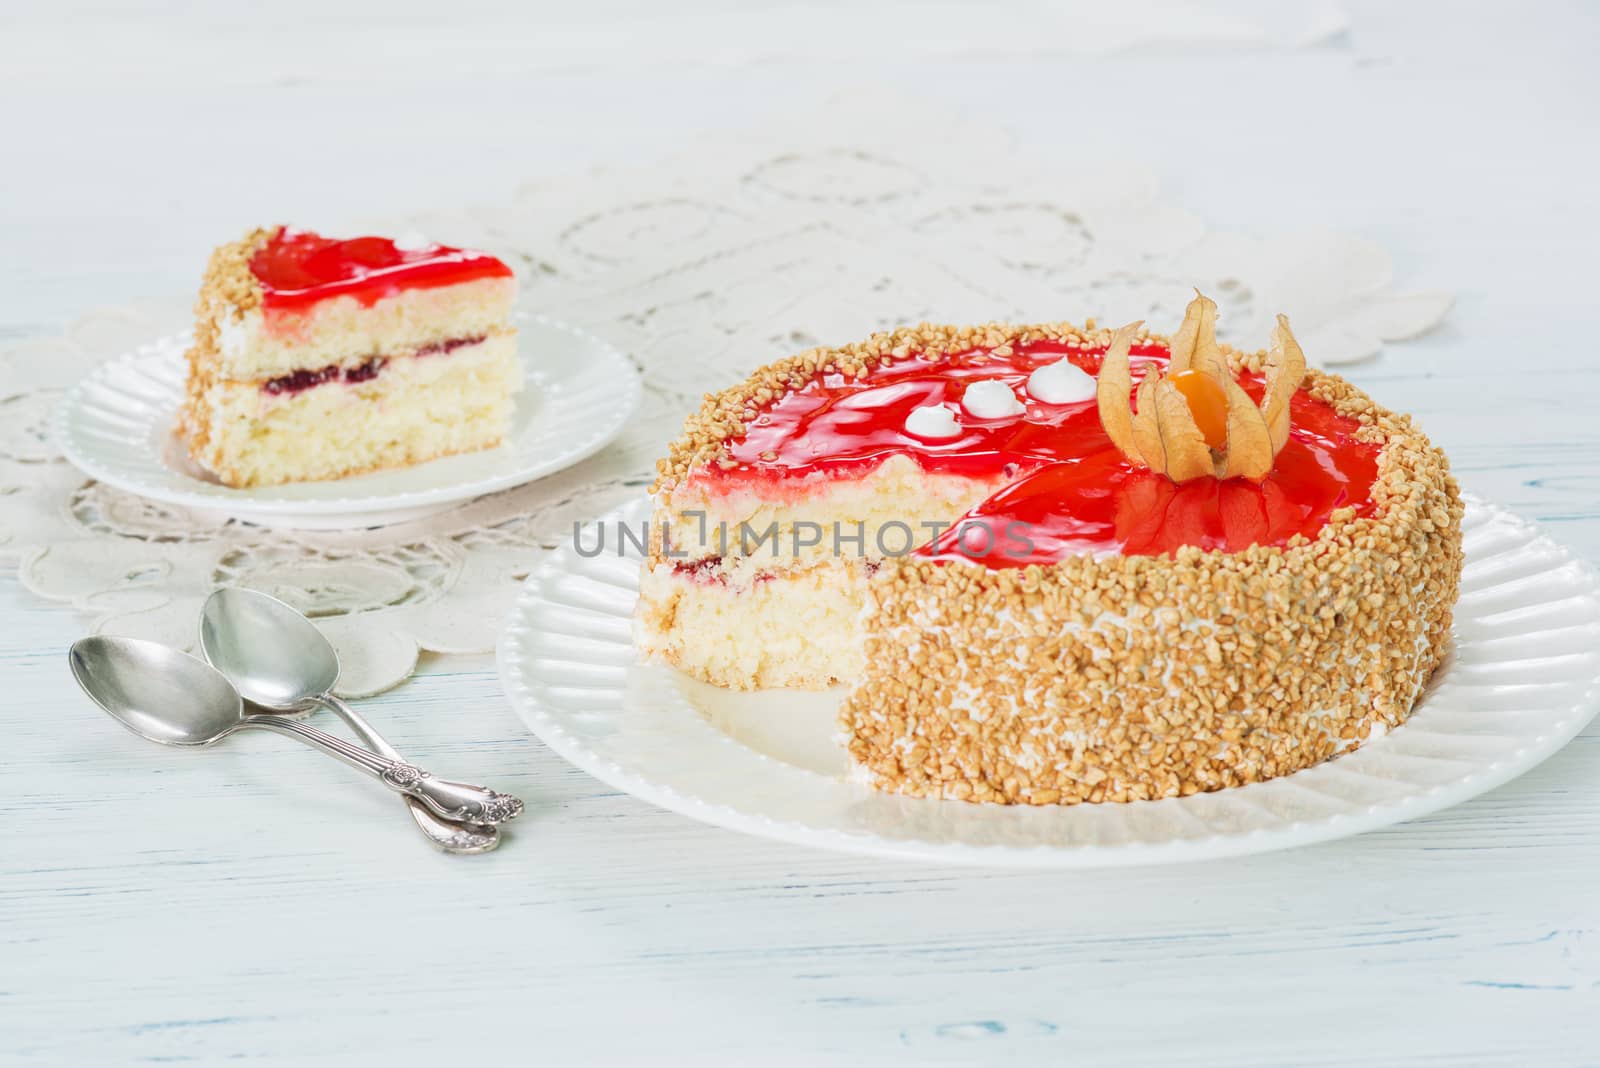 Cake with red jelly and cape gooseberry on plate on light background